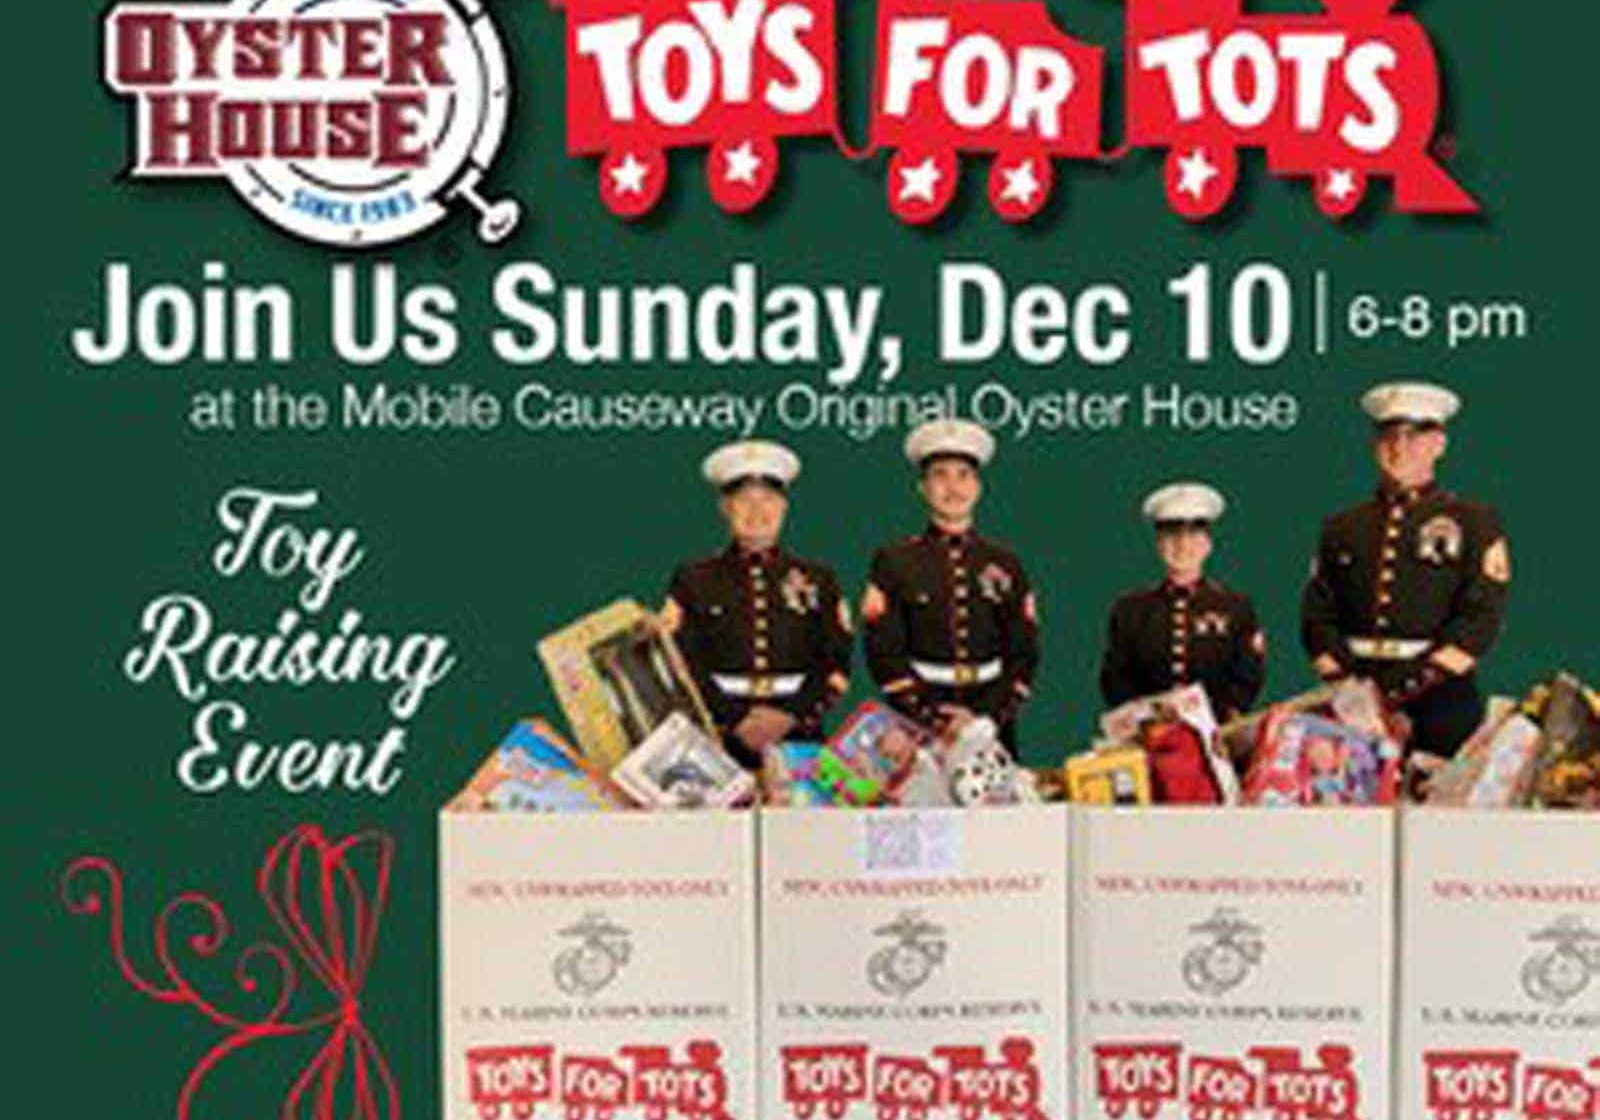 Original Oyster House Hosting Toys For Tots Event